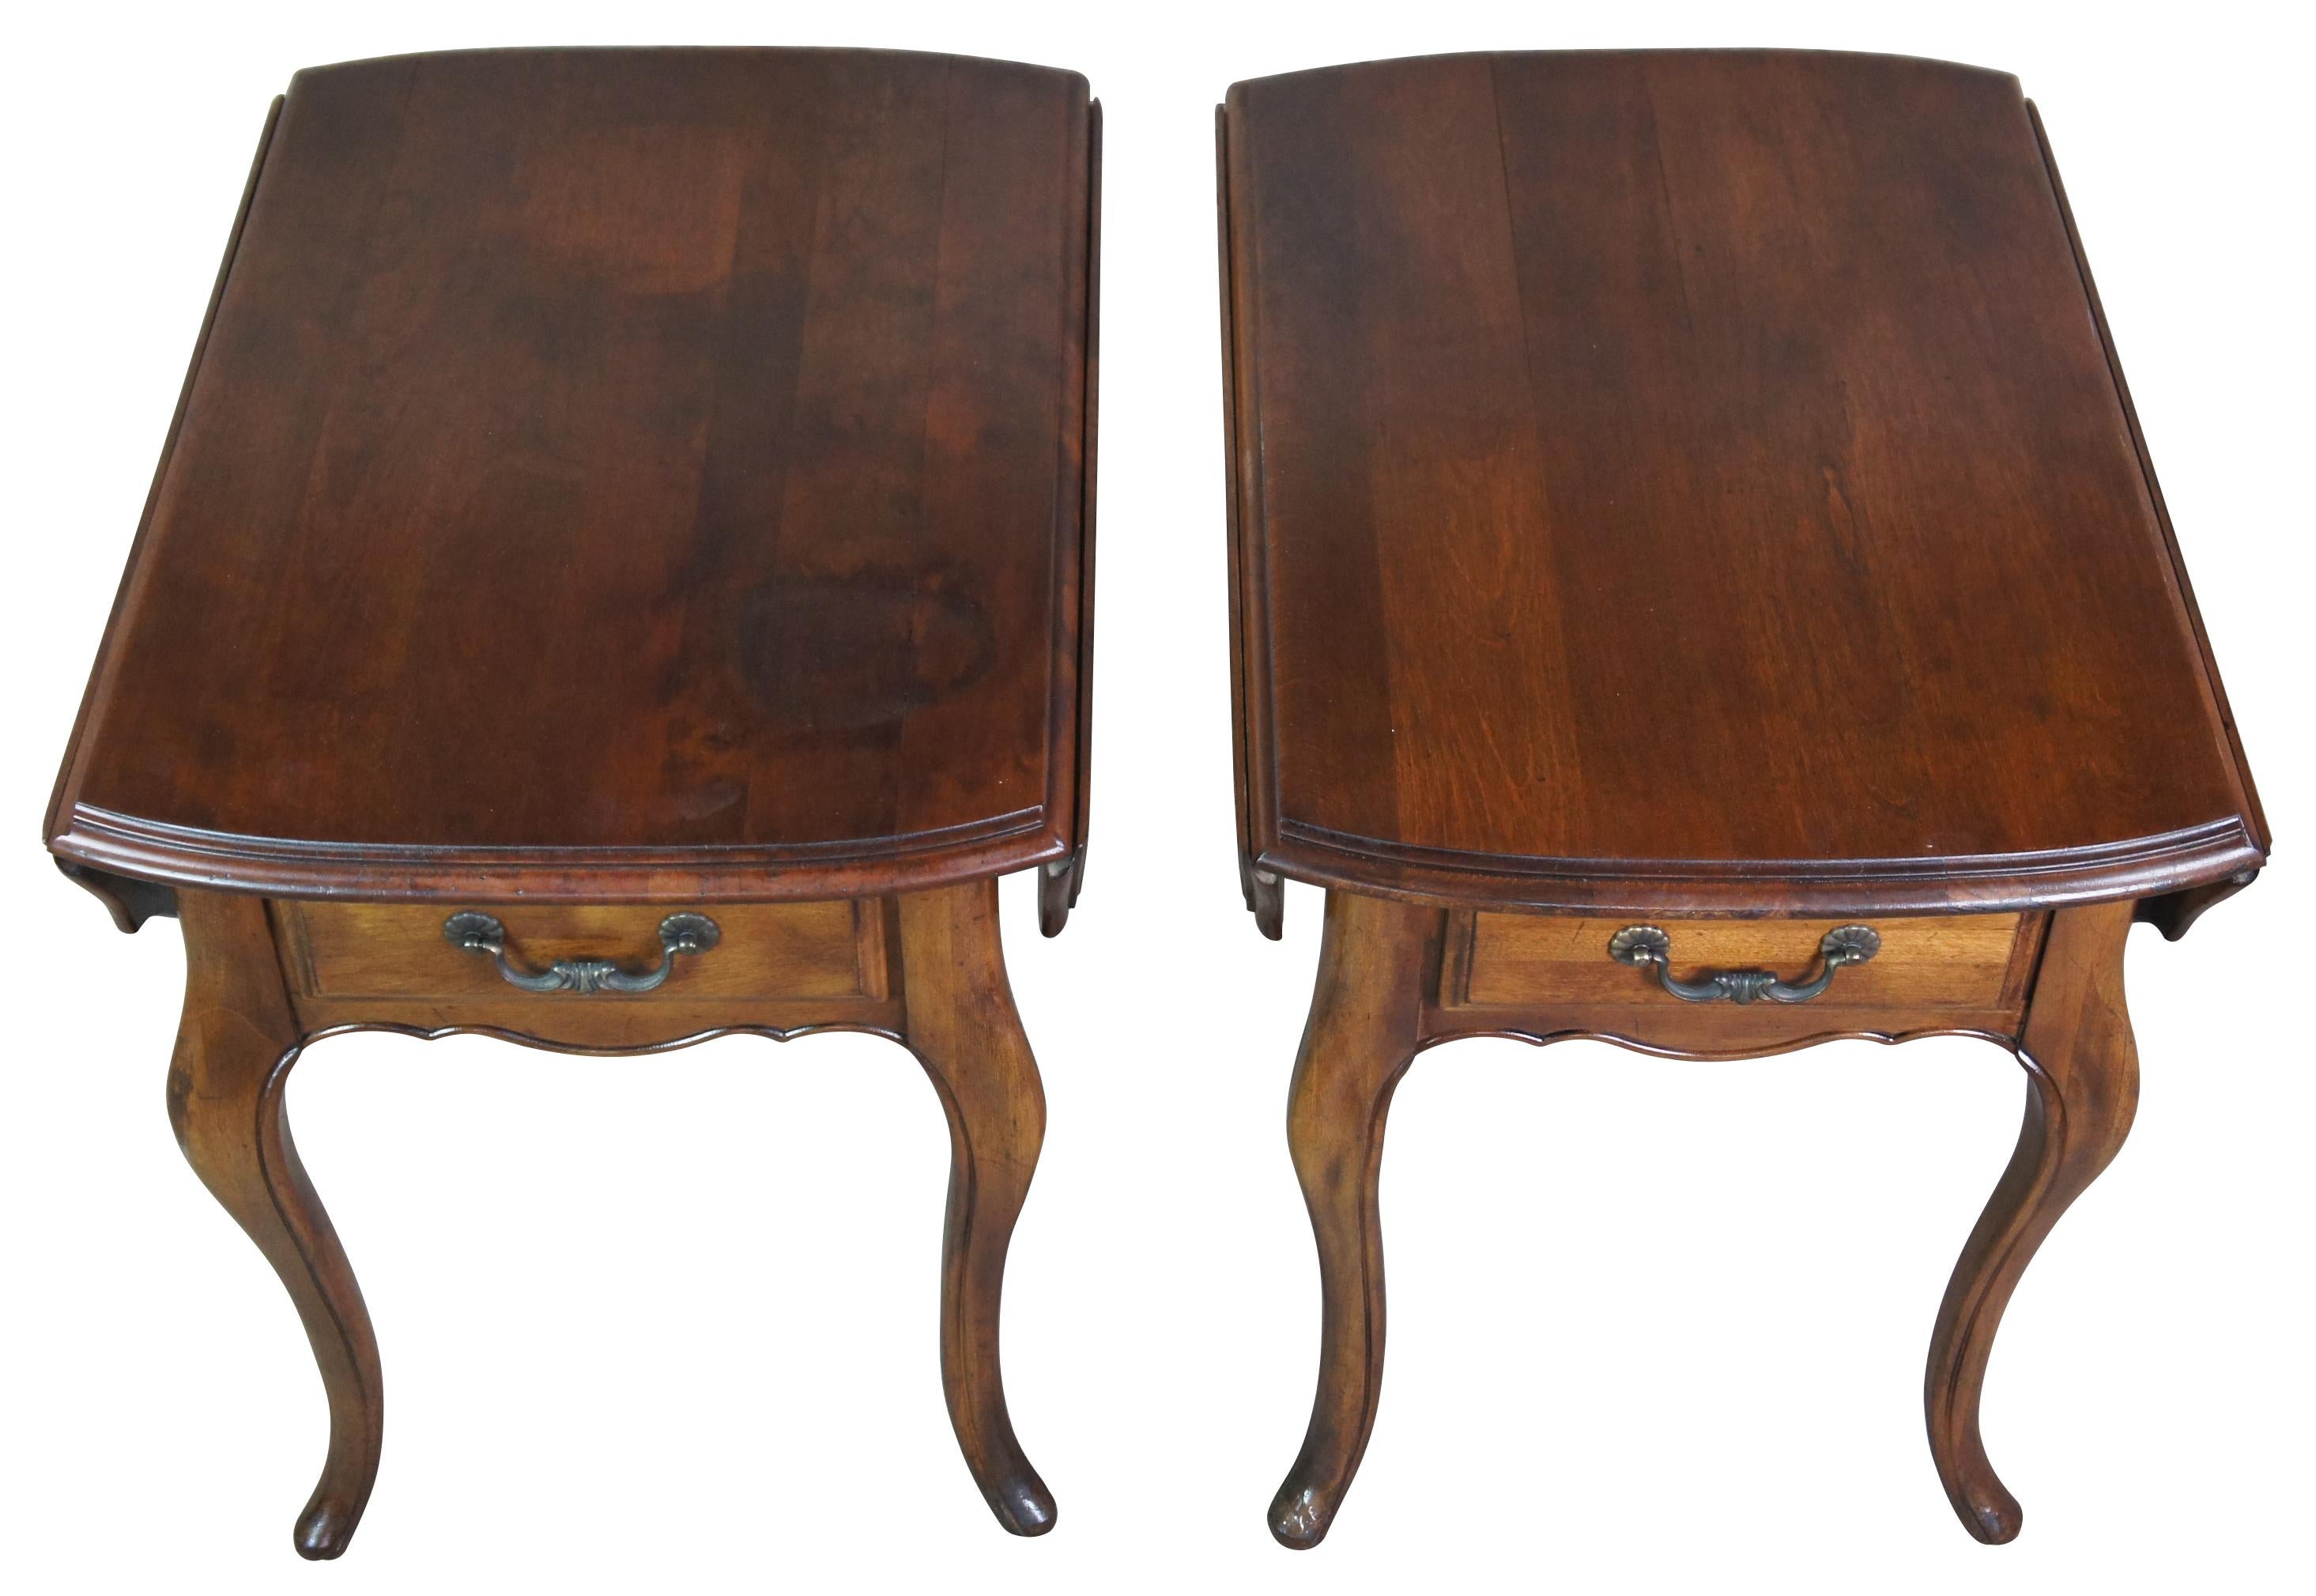 Pair of two vintage 1986 Ethan Allen French Country oval drop leaf side tables featuring serpentine form with one drawer. Made from Maple & Birch

Measures: 19.5